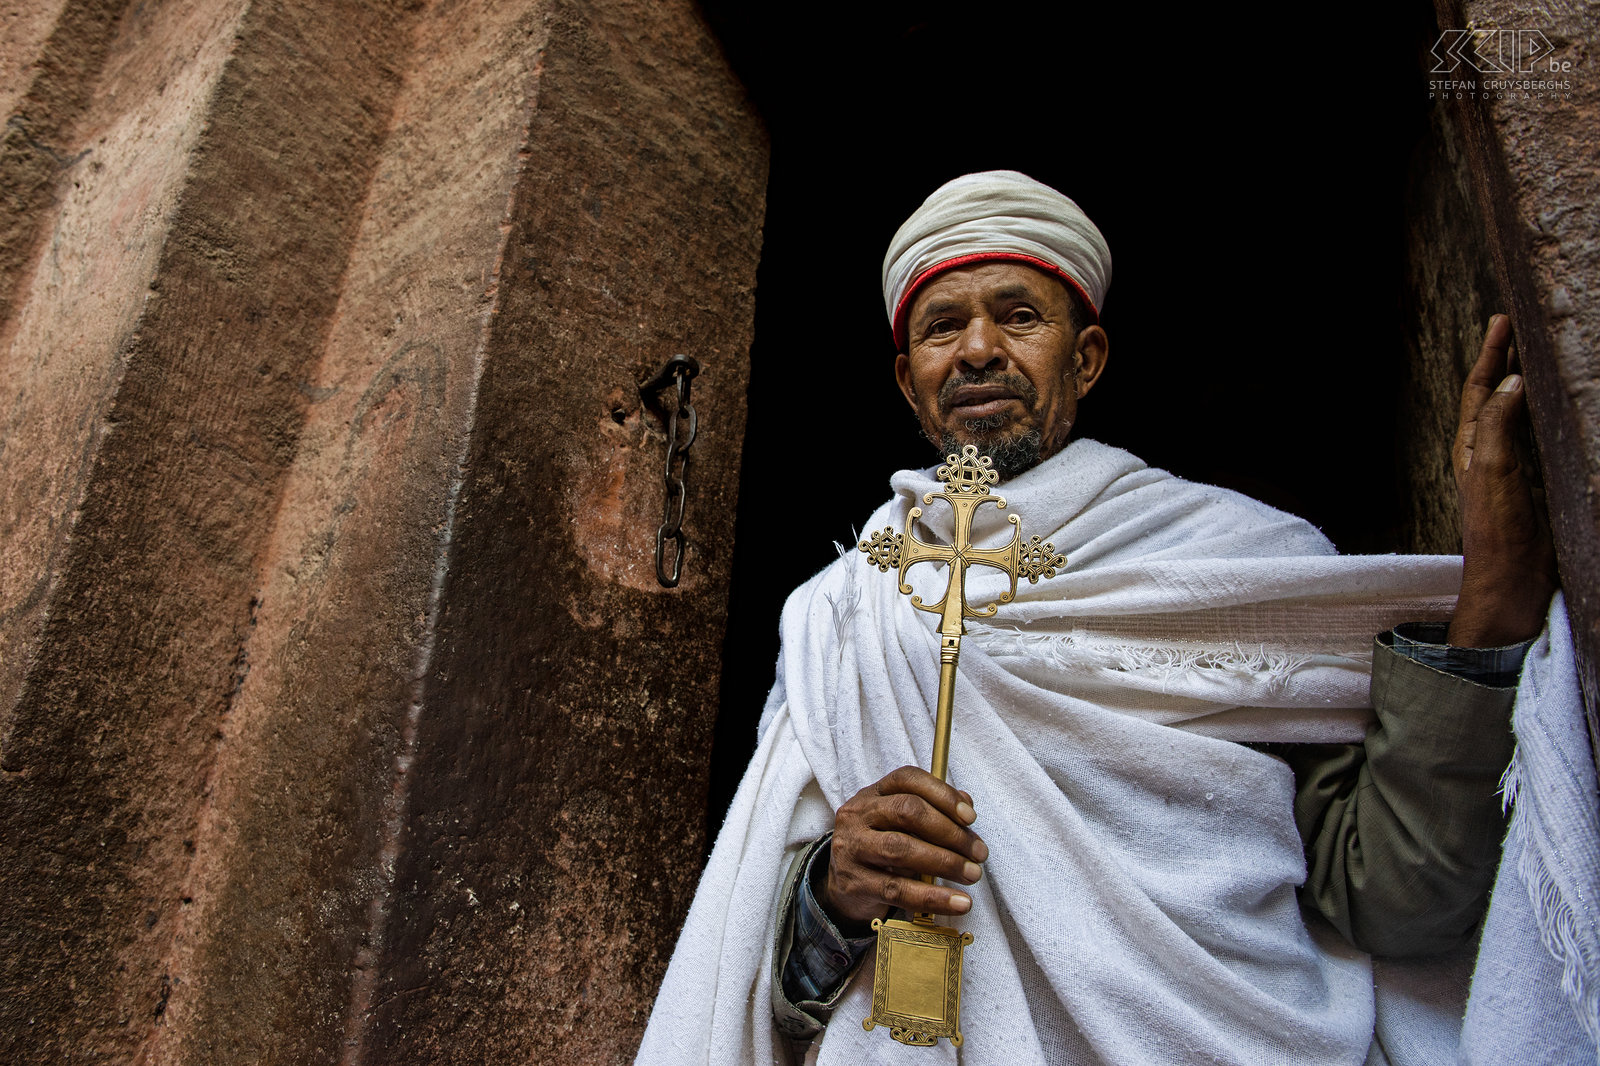 Lalibela - Priest The 11 medieval rock-cut  churches and monasteries of Lalibela are connected with small passageways and tunnels.It is still a centre of pilgrimage and there live a lot of devoted Orthodox priests and monks. These priests like to show very old crosses and manuscripts to the tourists. Stefan Cruysberghs